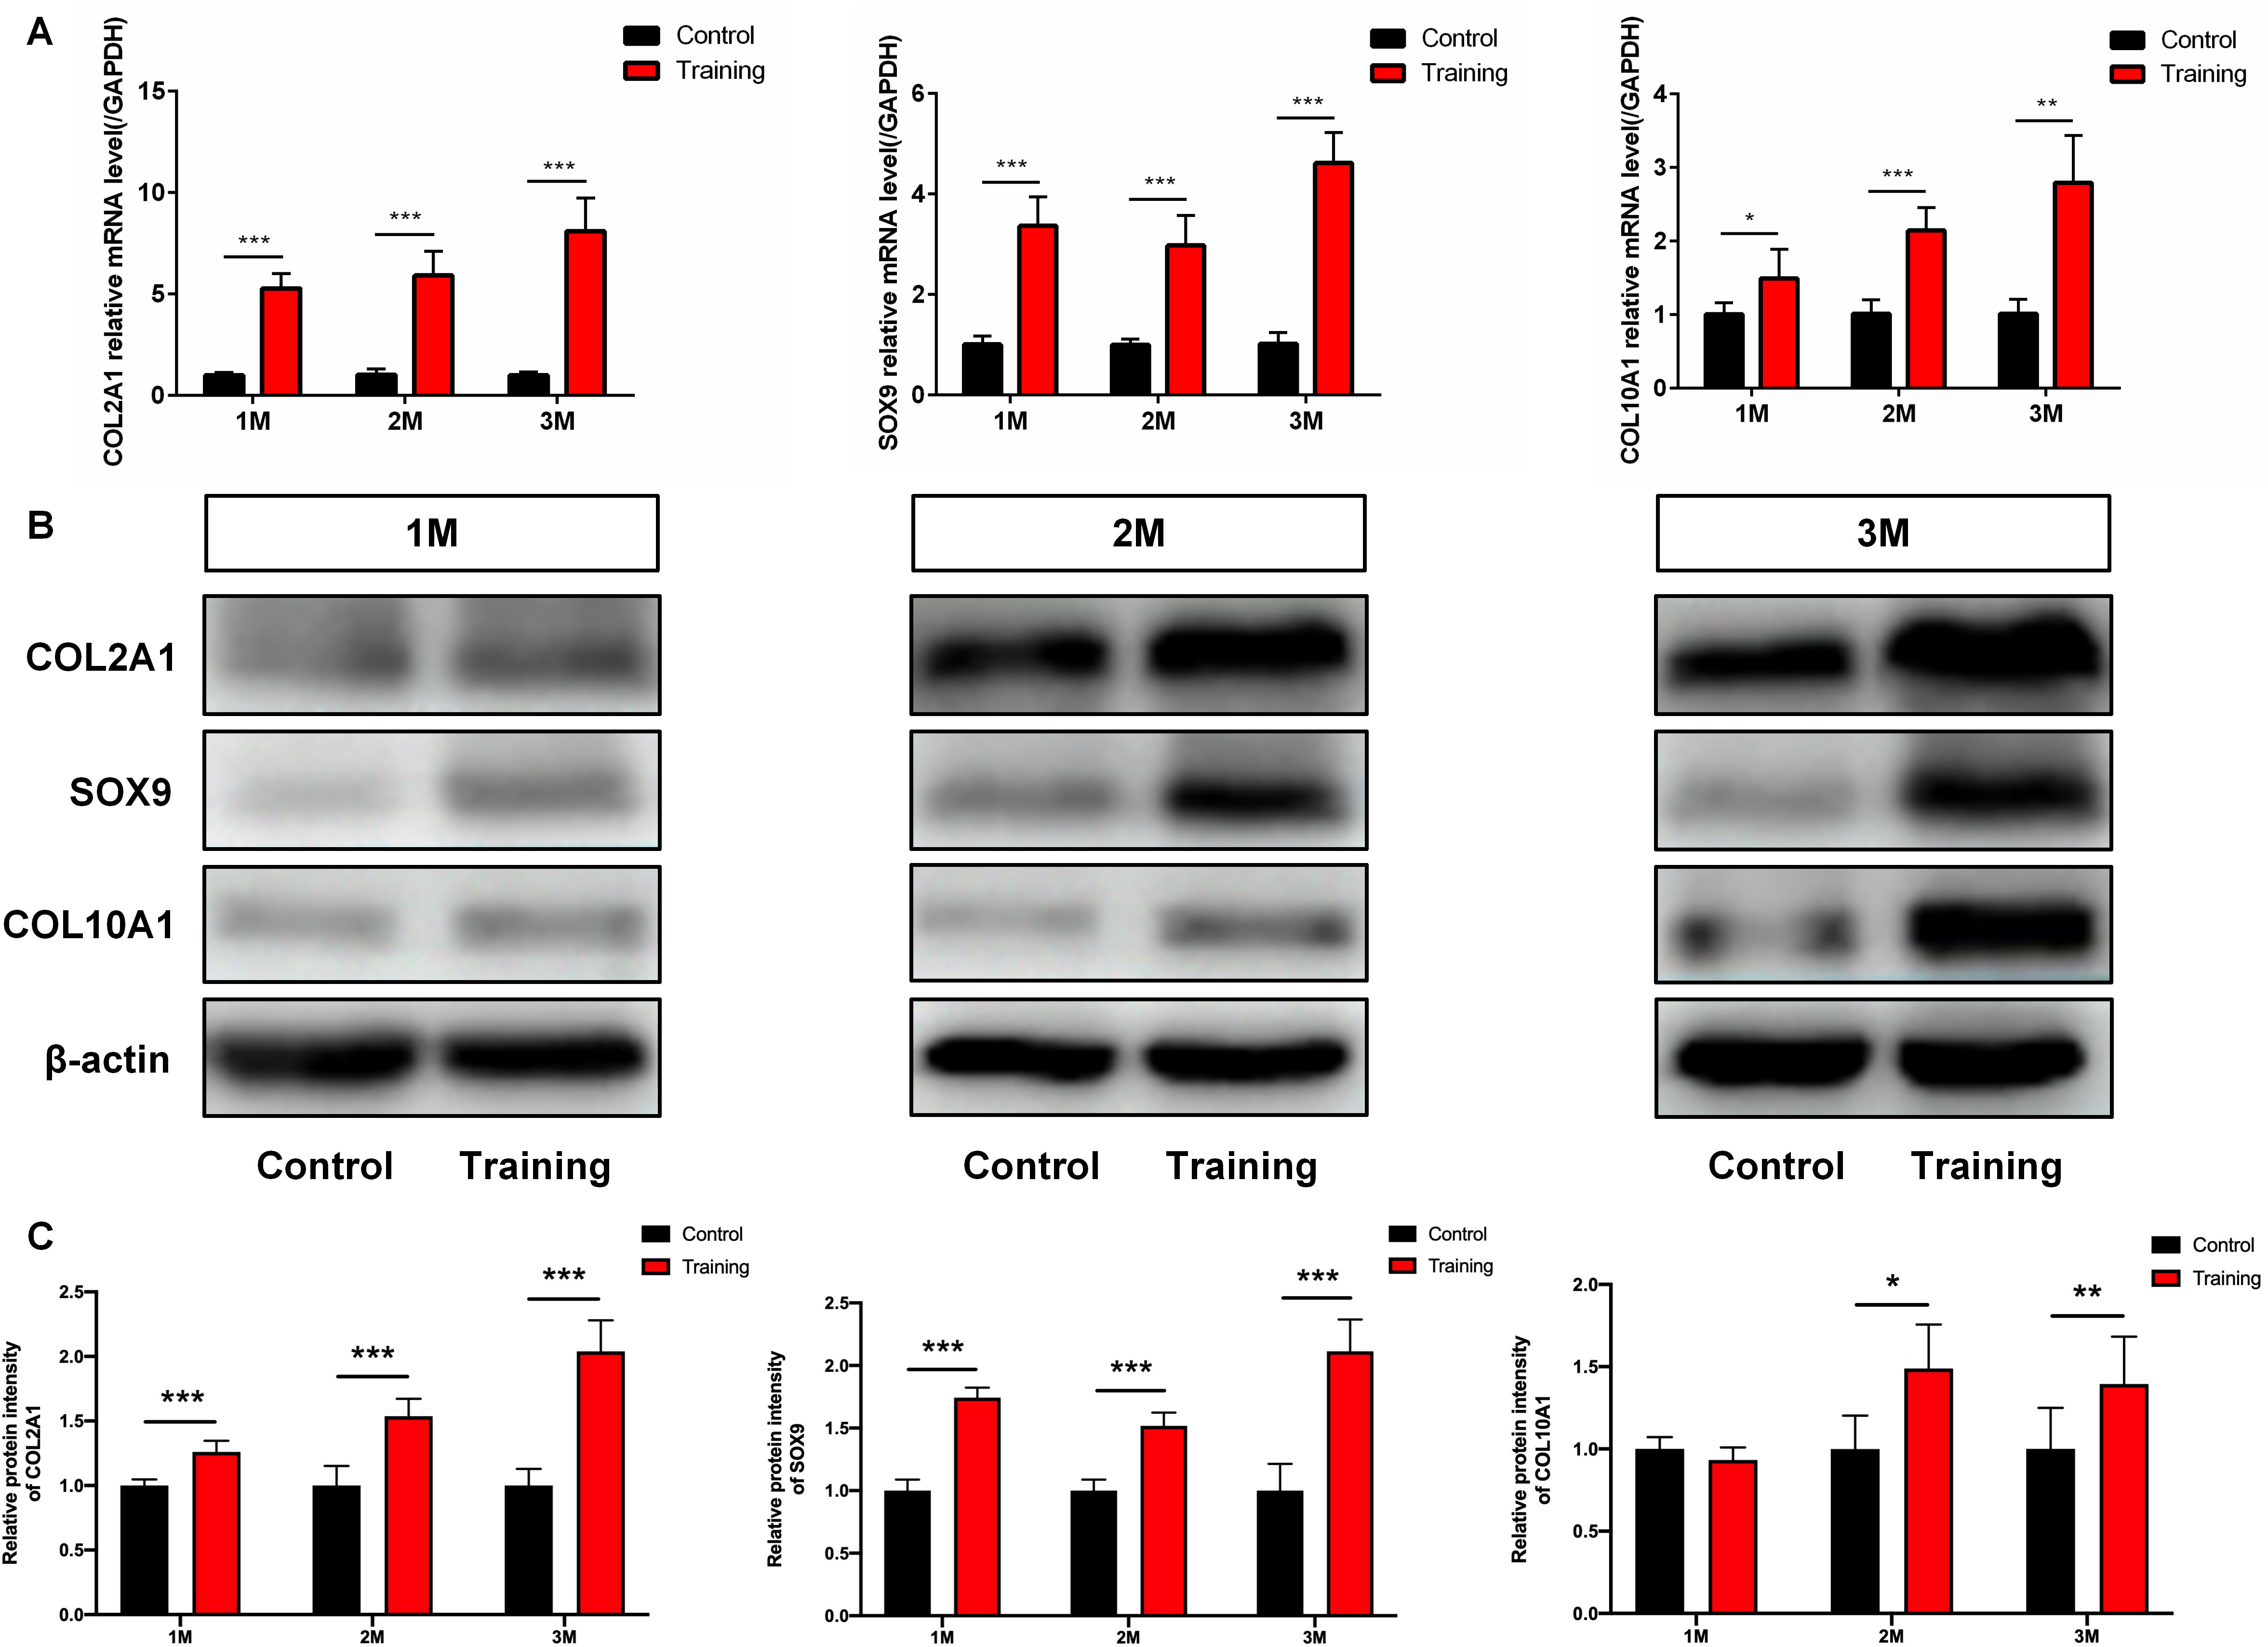 Fig. 4 
            The expression of cartilage markers in the tendon-bone insertion samples was significantly increased after treadmill training. a) The messenger RNA (mRNA) expression levels of cartilage markers such as type II collagen (COL2A1), SOX9, and type X collagen (COL10A1) in each group. b) Typical Western blot (WB) bands of cartilage markers of each group. c) Mean grey value statistics of WB bands in each group. Data are shown as the mean and standard deviation. N = 5 for all groups, *p < 0.05, **p < 0.01, and ***p < 0.001 compared with the control groups. GAPDH, glyceraldehyde 3-phosphate dehydrogenase.
          